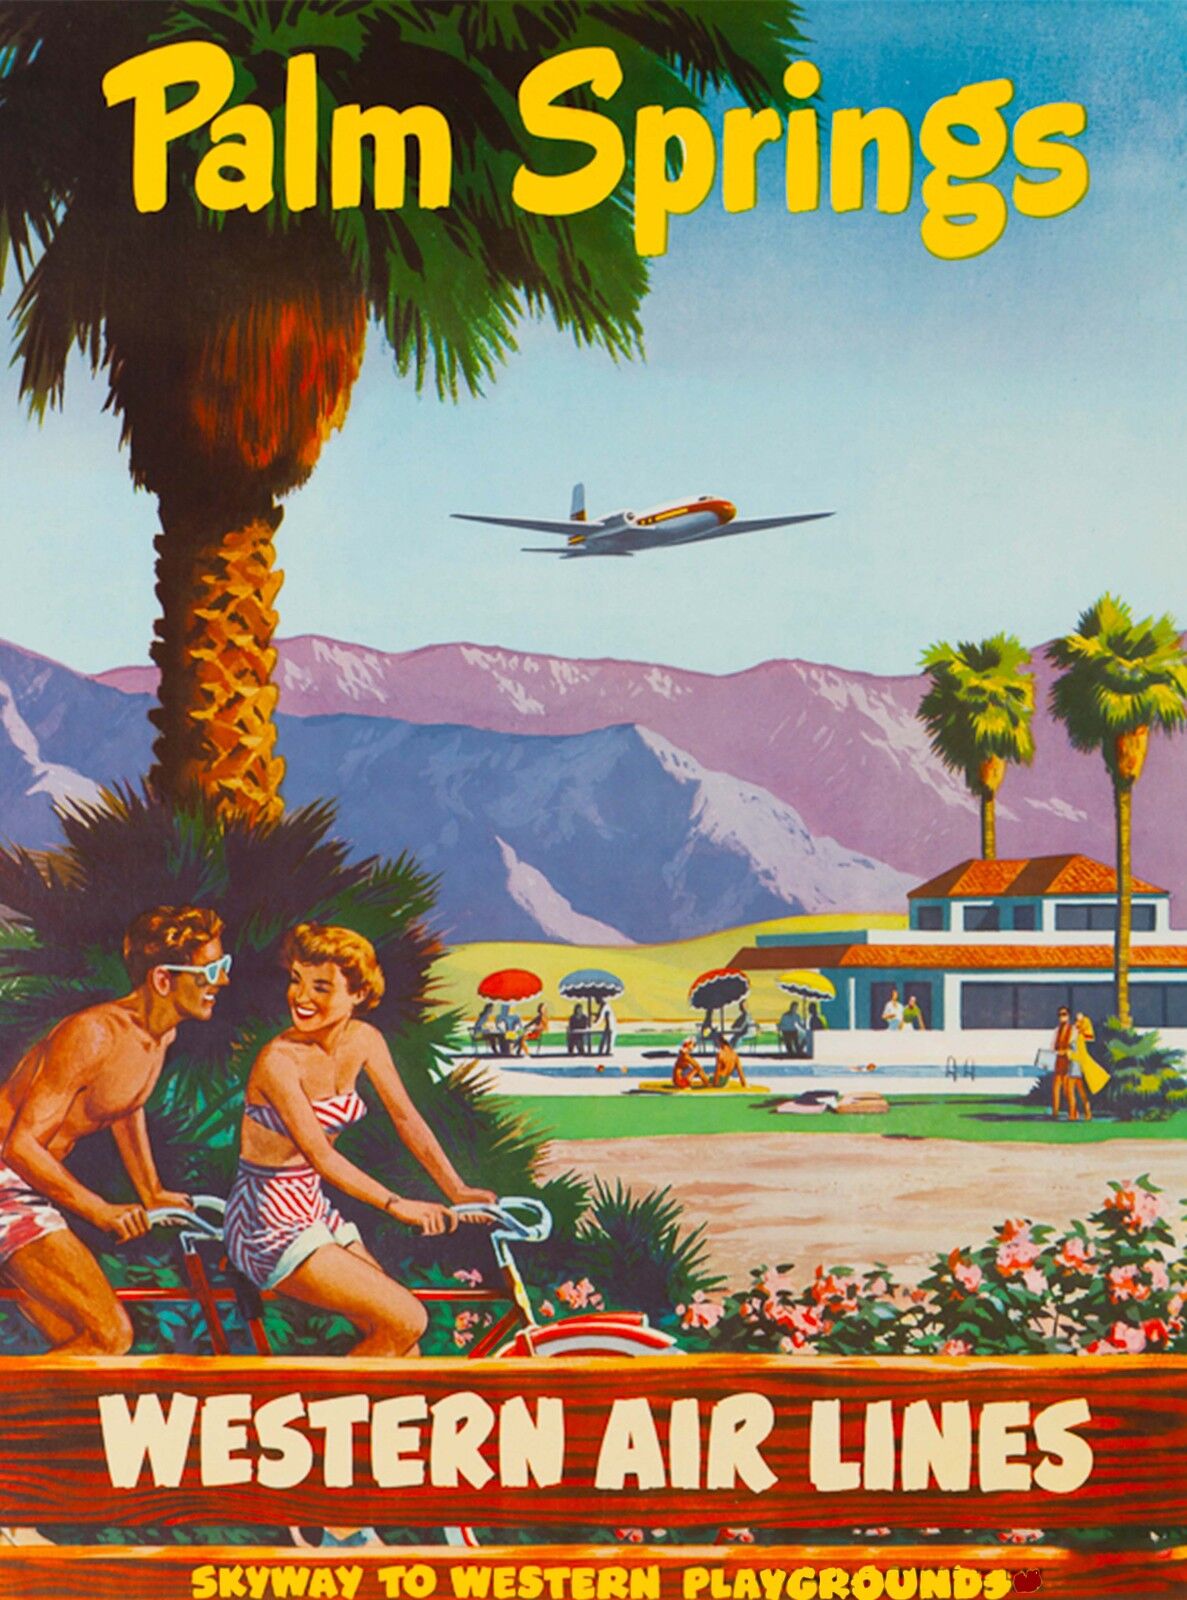 Palm Springs California United States Western Travel Advertisement Poster 